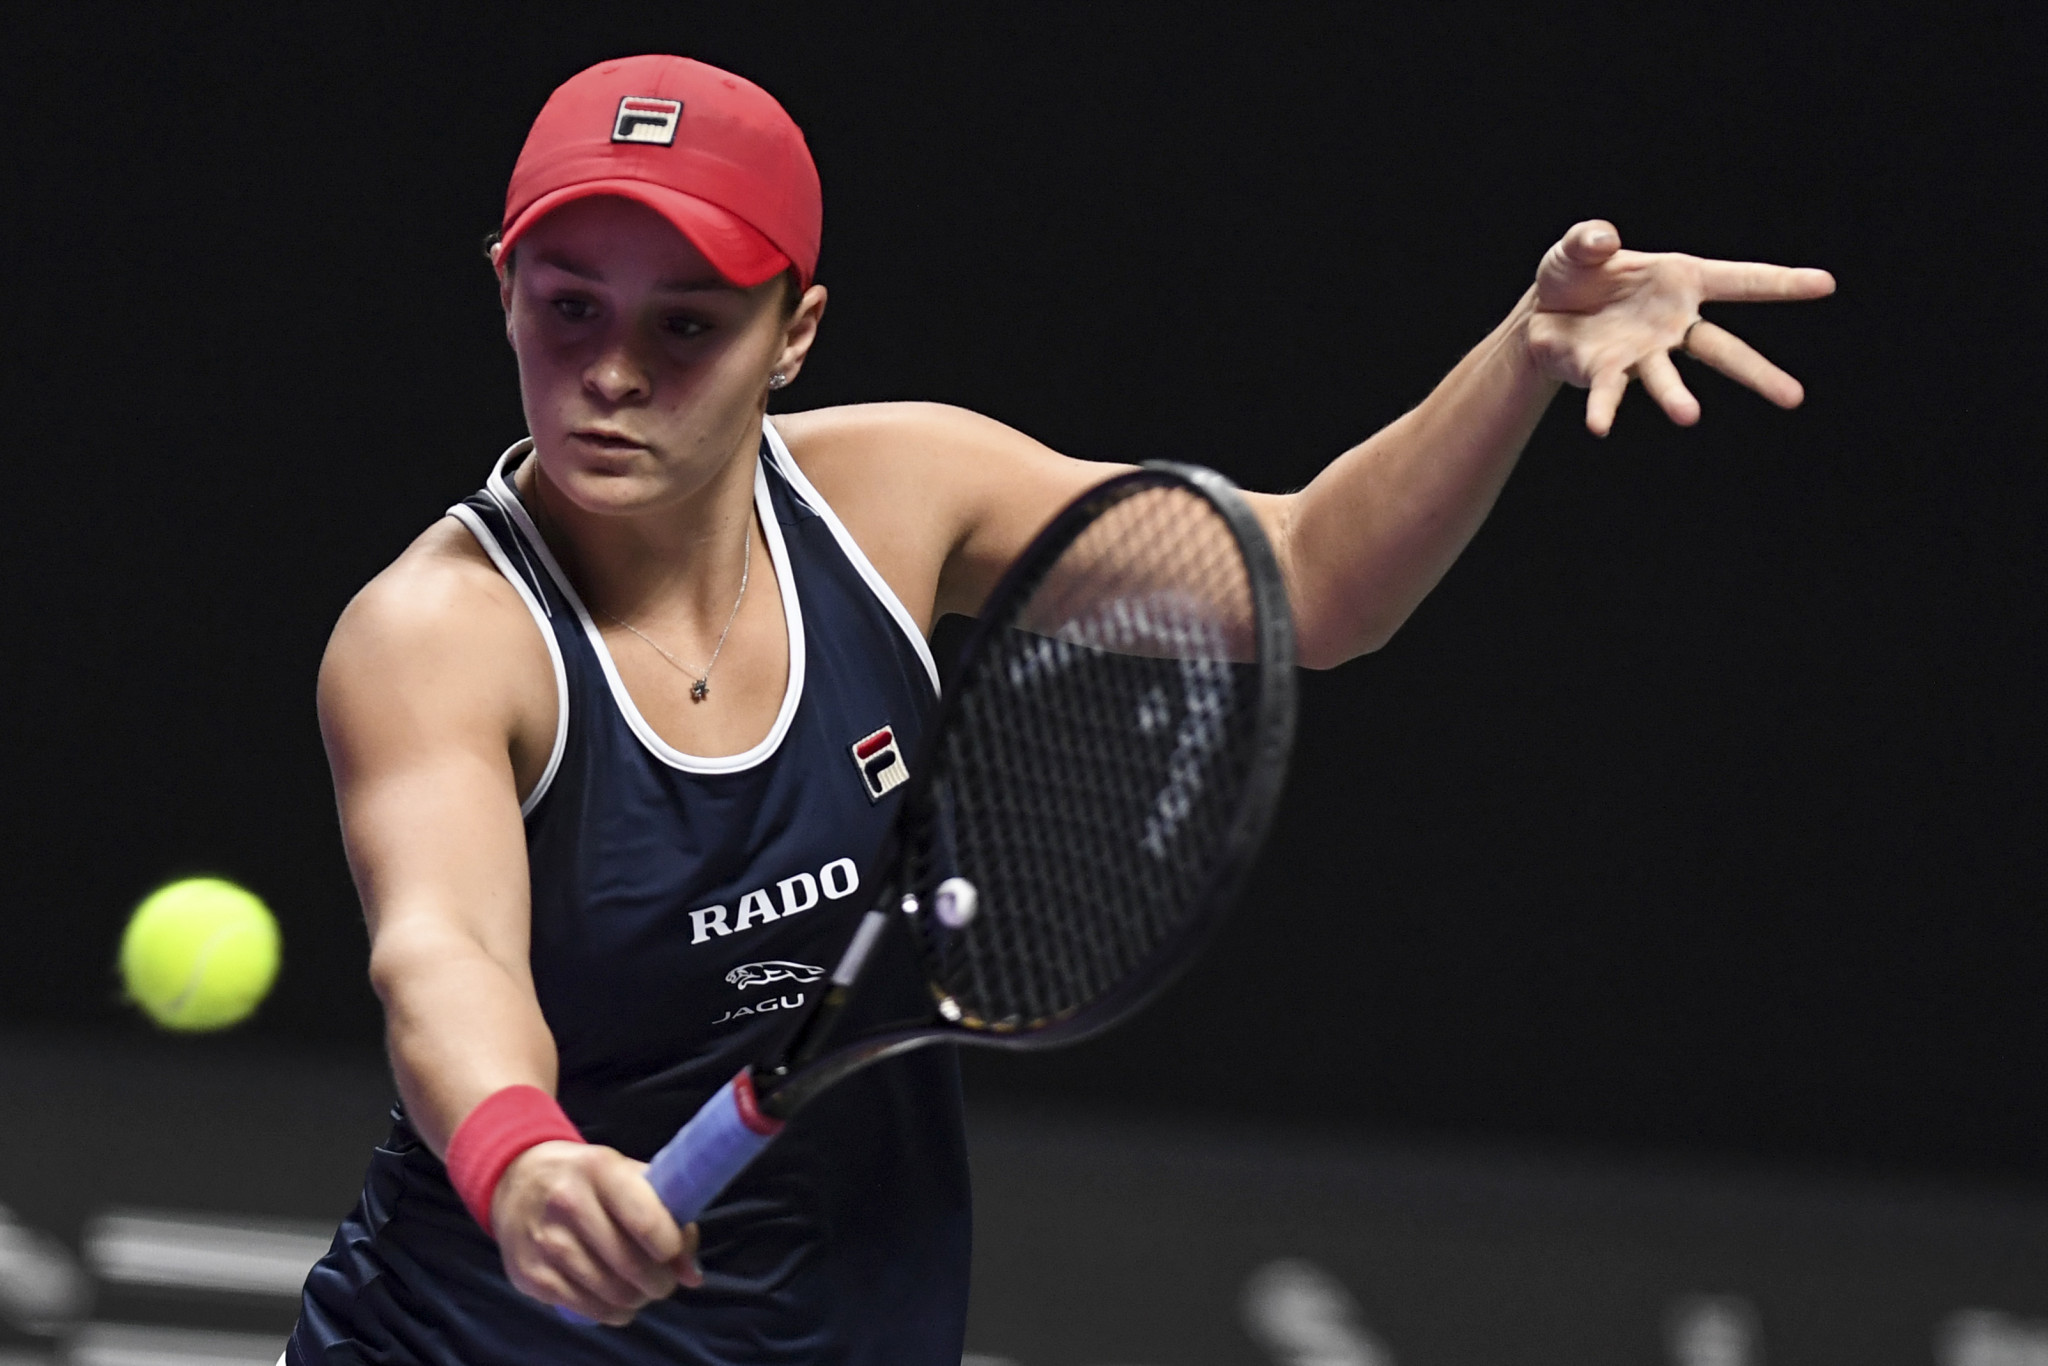 Australian world number one Ashleigh Barty won her first match of the WTA Finals ©Getty Images